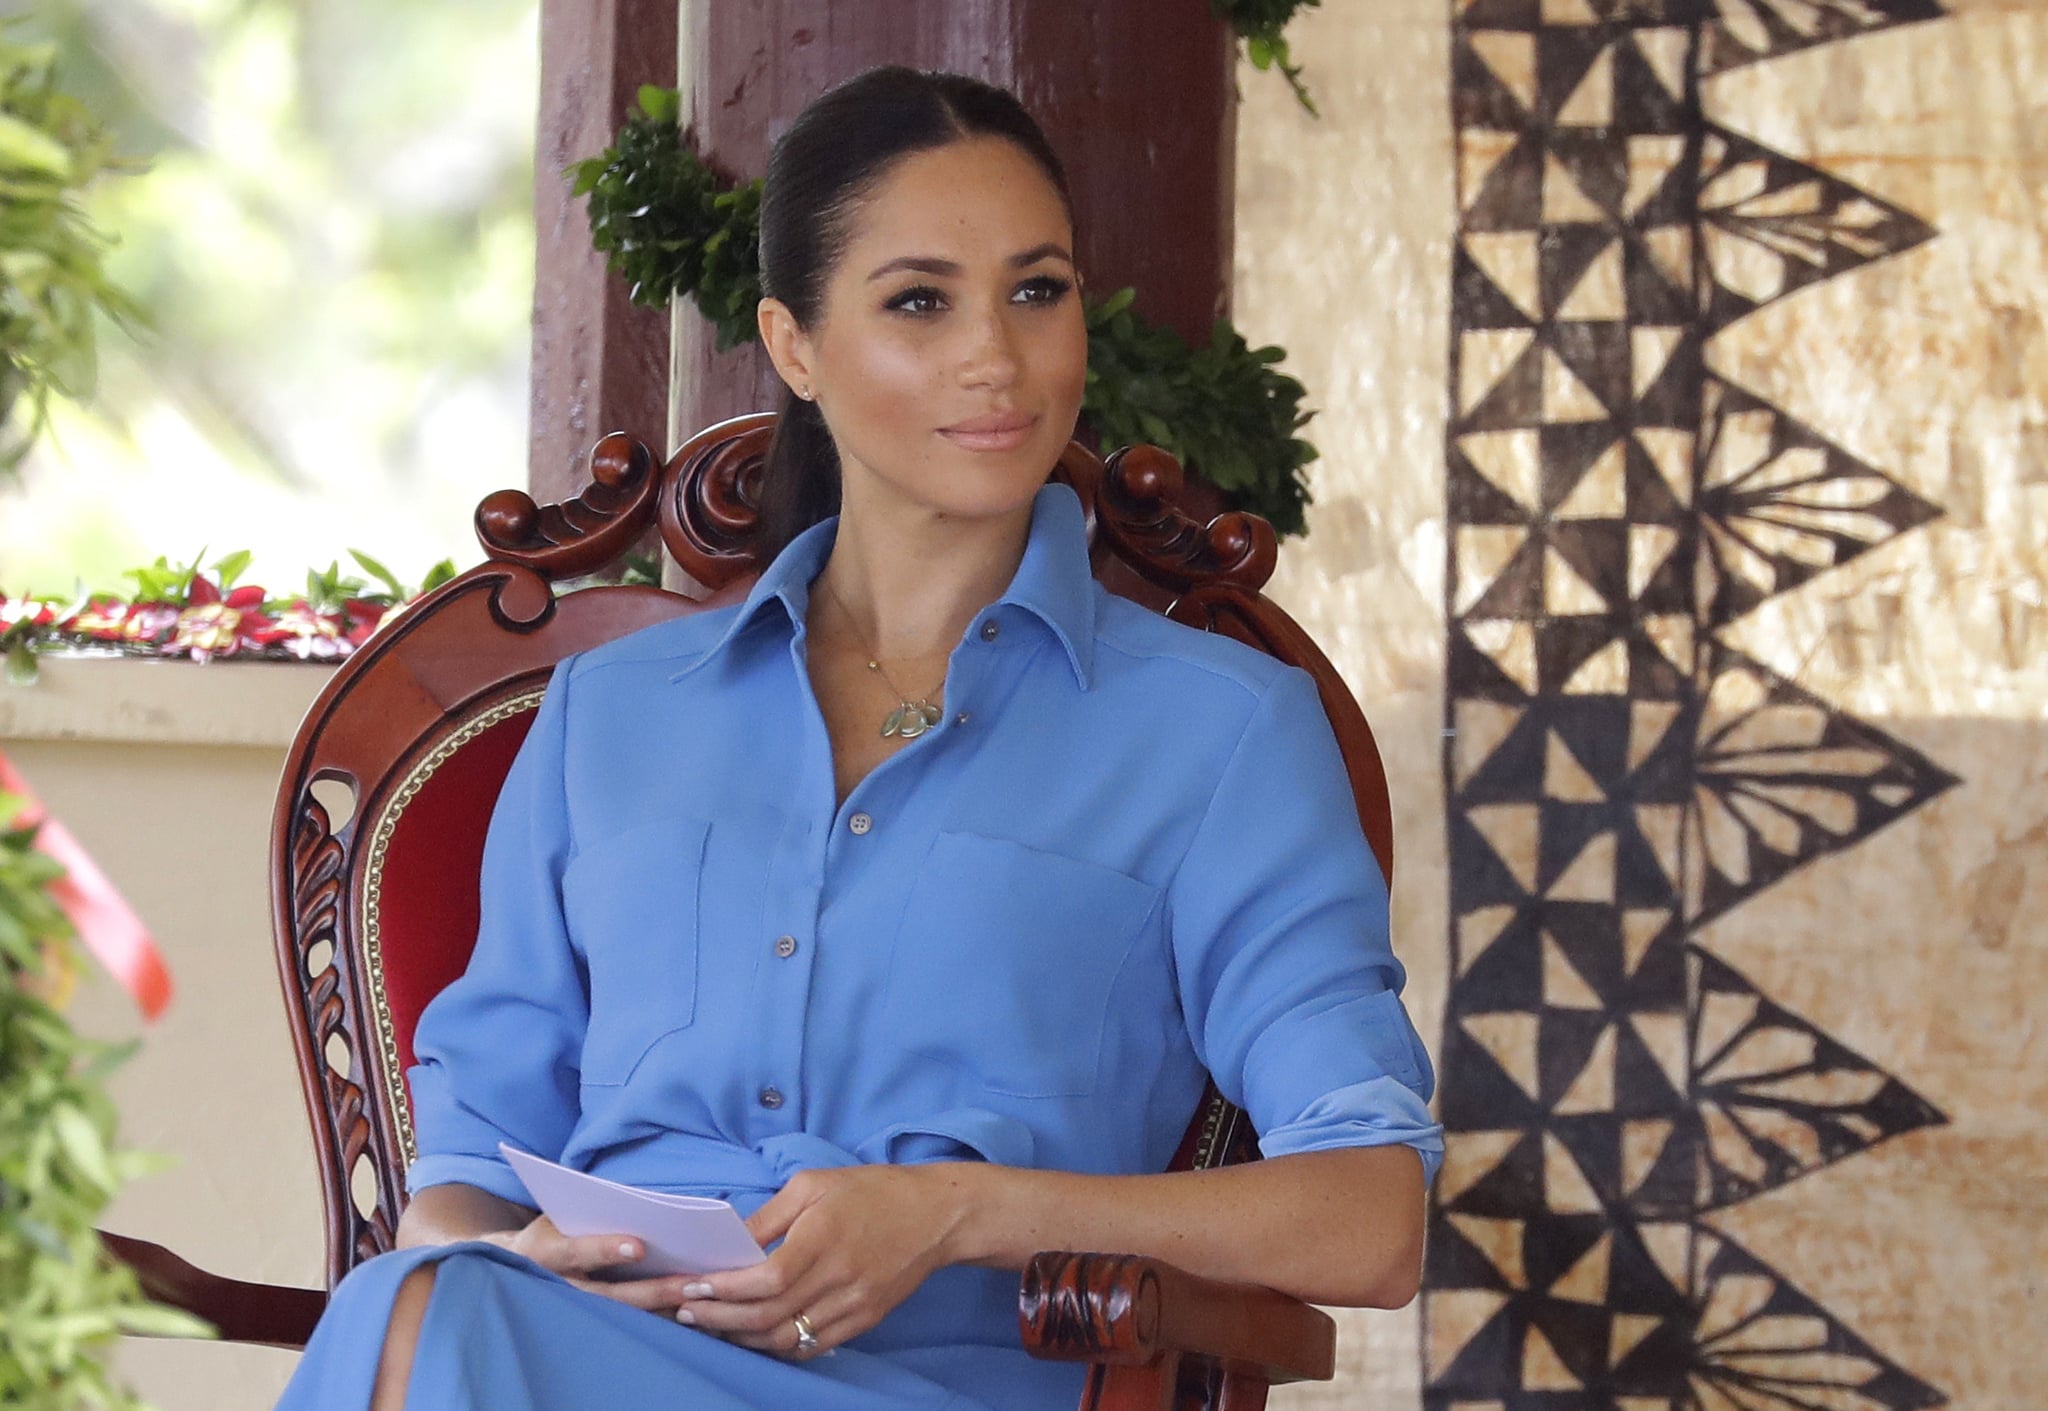 TUPOU COLLEGE TOLOA, TONGA - OCTOBER 26: Meghan, Duchess of Sussex talks with students during a visit to Tupou College in Tonga on October 26, 2018. Prince Harry and his wife Meghan are on day 11 of their 16-day tour of Australia and the South Pacific. (Photo by Kirsty Wigglesworth - Pool/Getty Images)